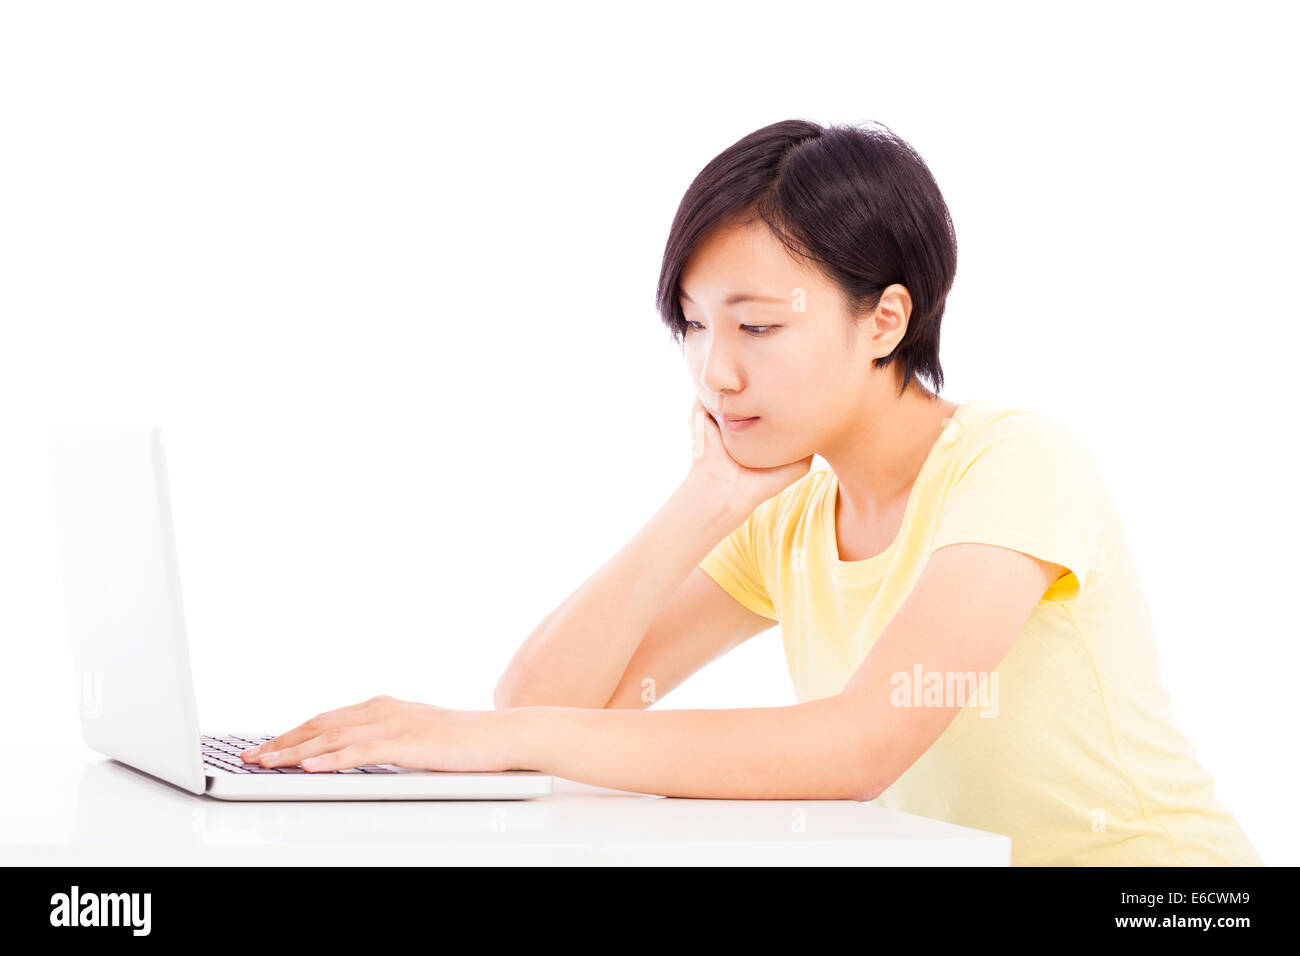 tired woman in front of a laptop, isolated on white background Stock Photo